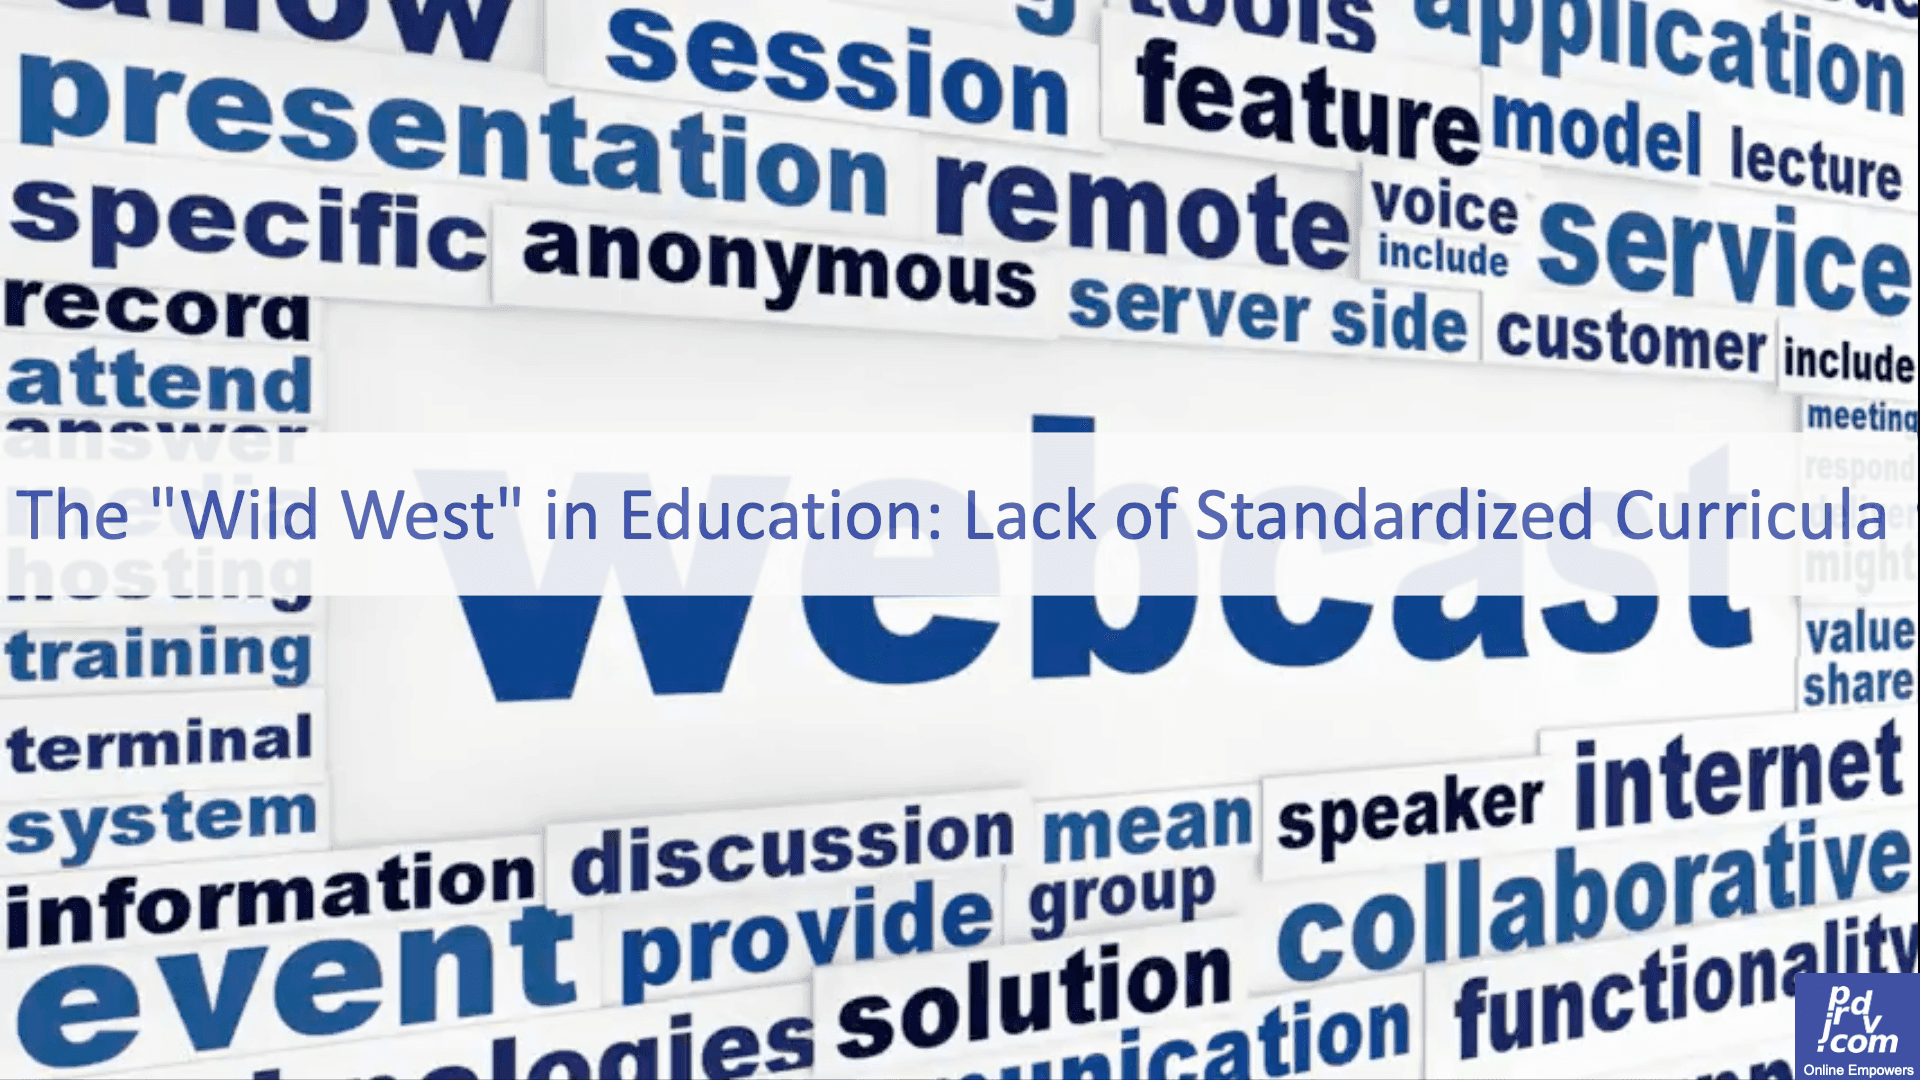 The Wild West in Education: Lack of Standardized Curricula